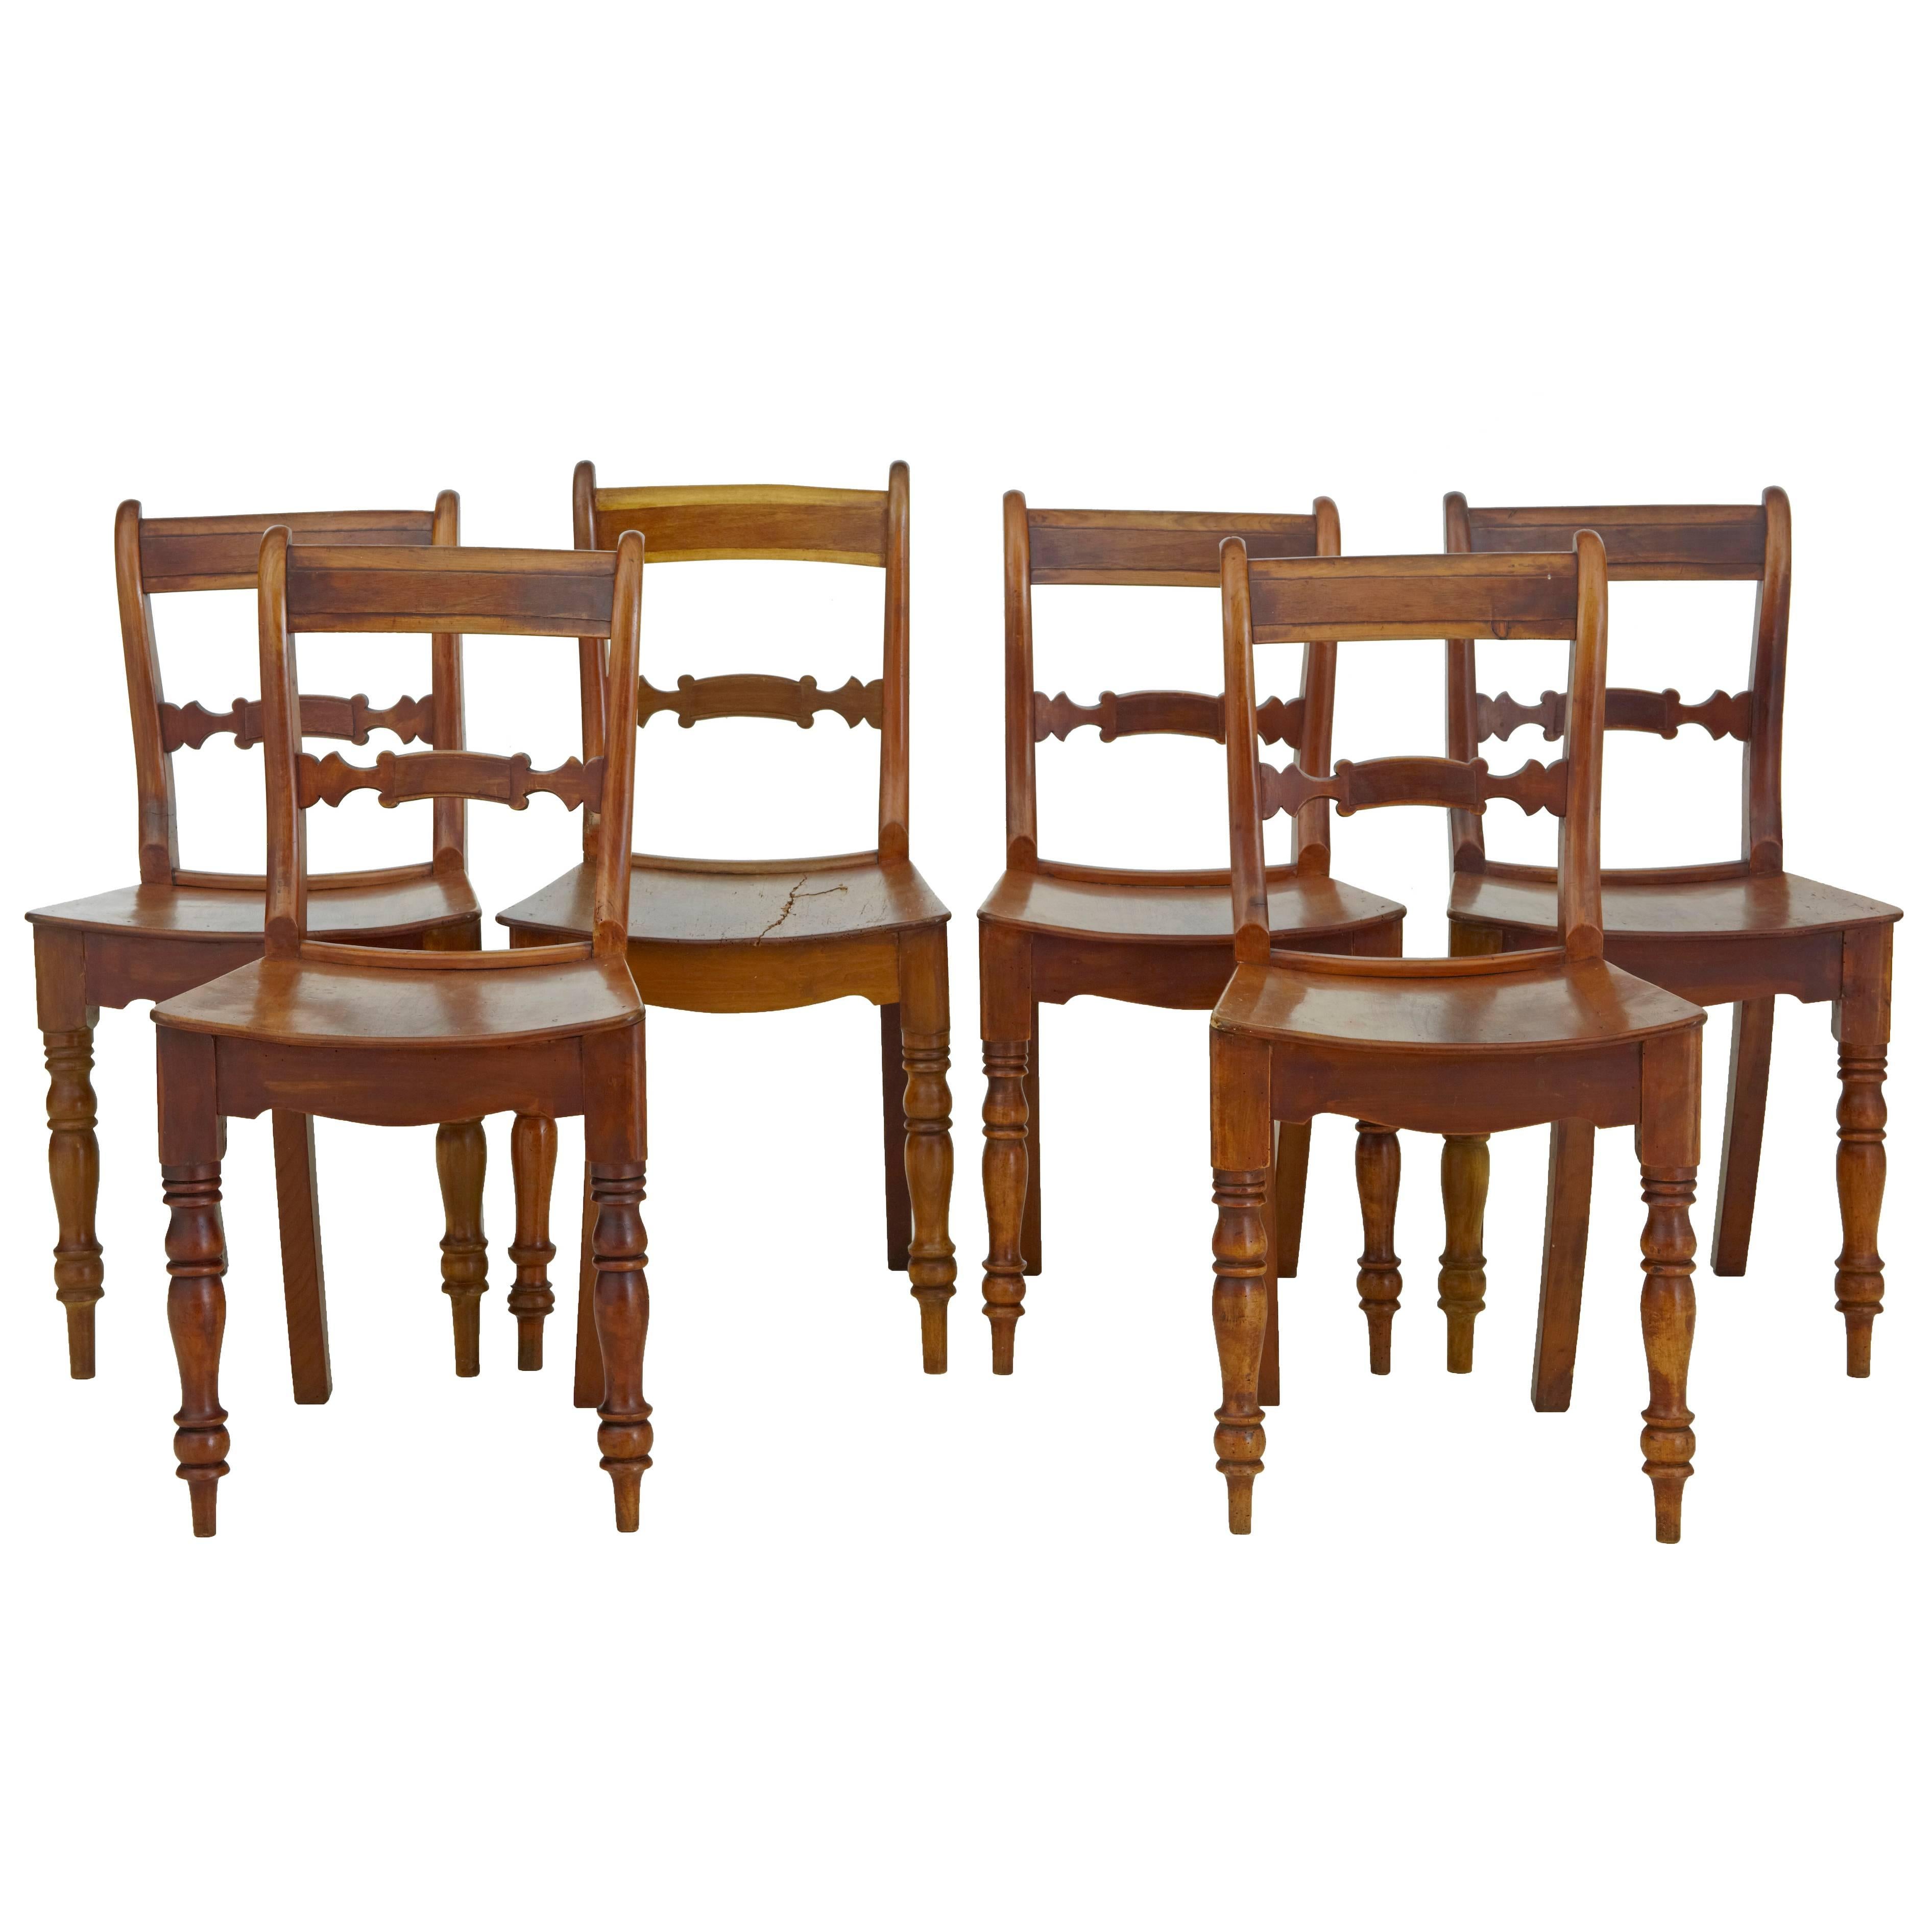 Set of Six 19th Century Fruitwood Saddle Seat Dining Chairs